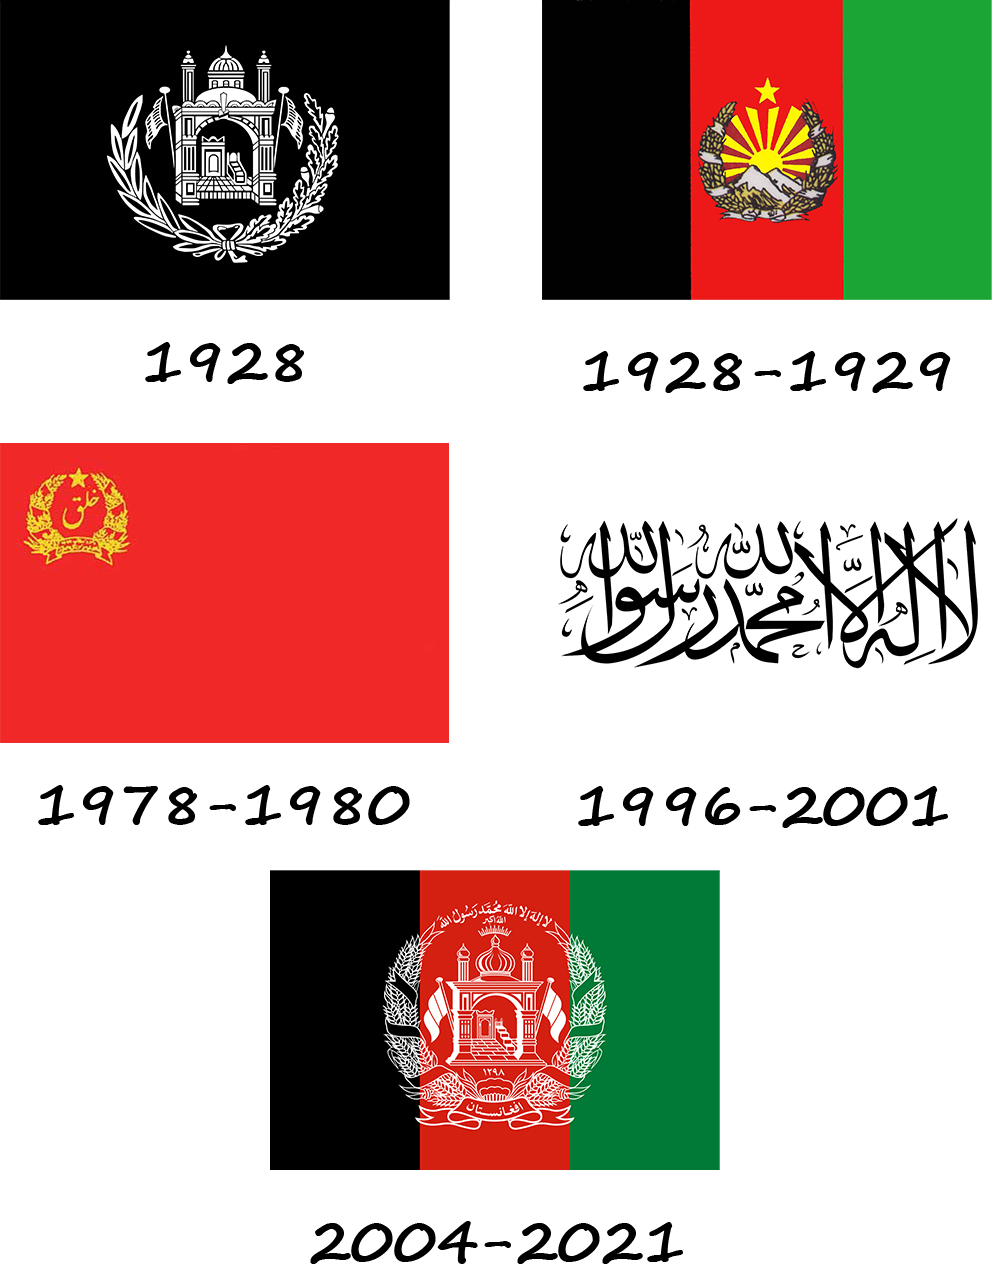 History of Afghanistan's flag, how it has changed throughout its existence